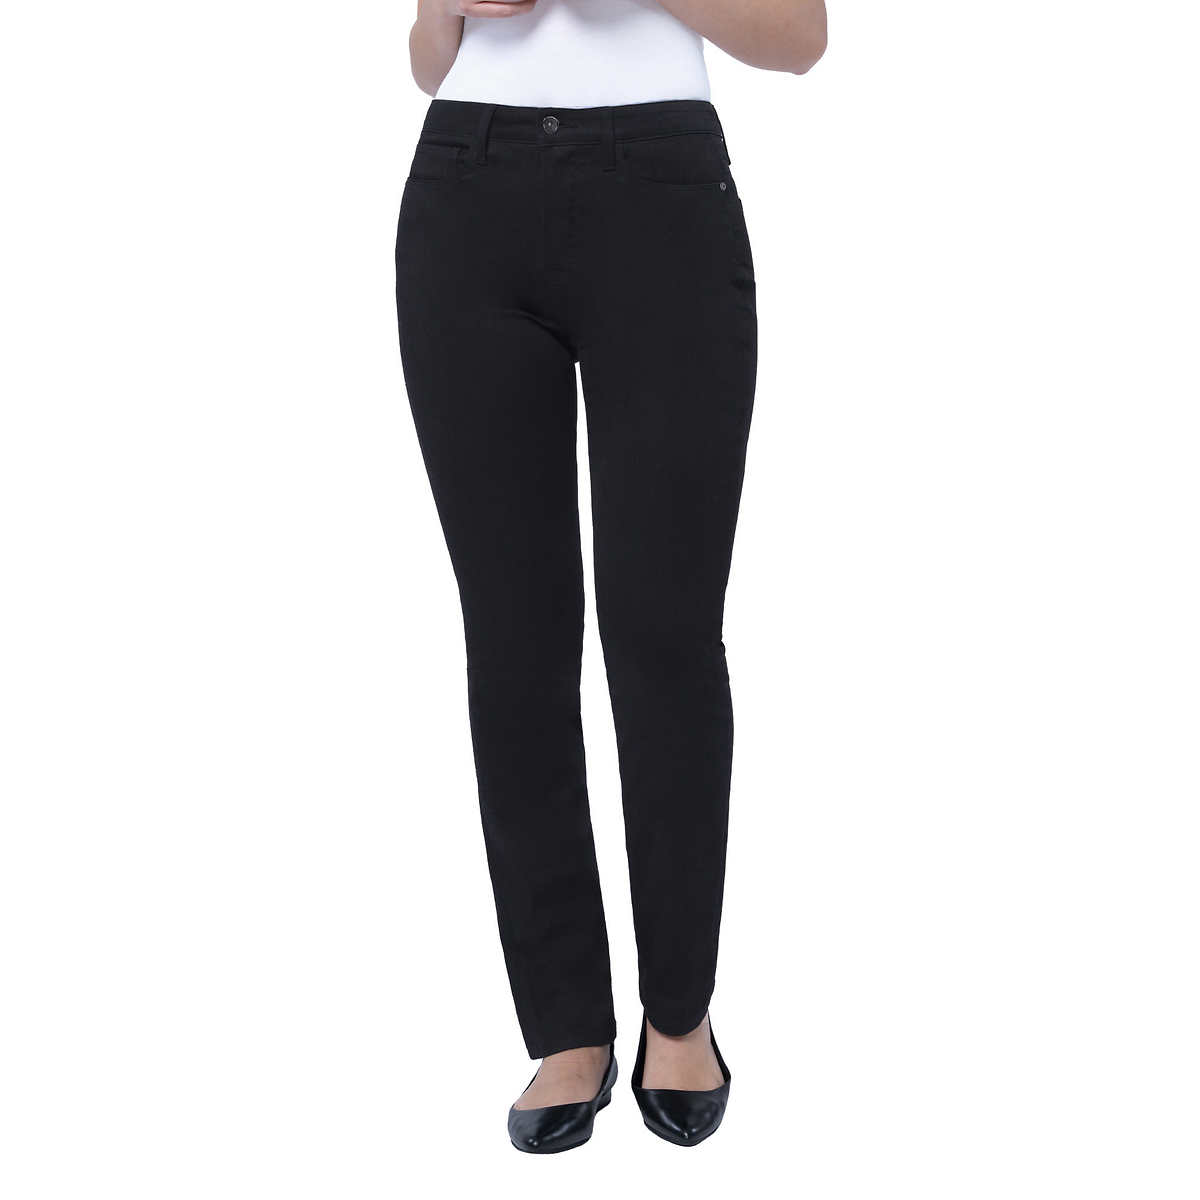 SATIMA Women's & Girl's Relaxed Fit Jeans Pant (ST-Denim Jeans Pant_Free  Size ) at Rs 599, Ladies Pants